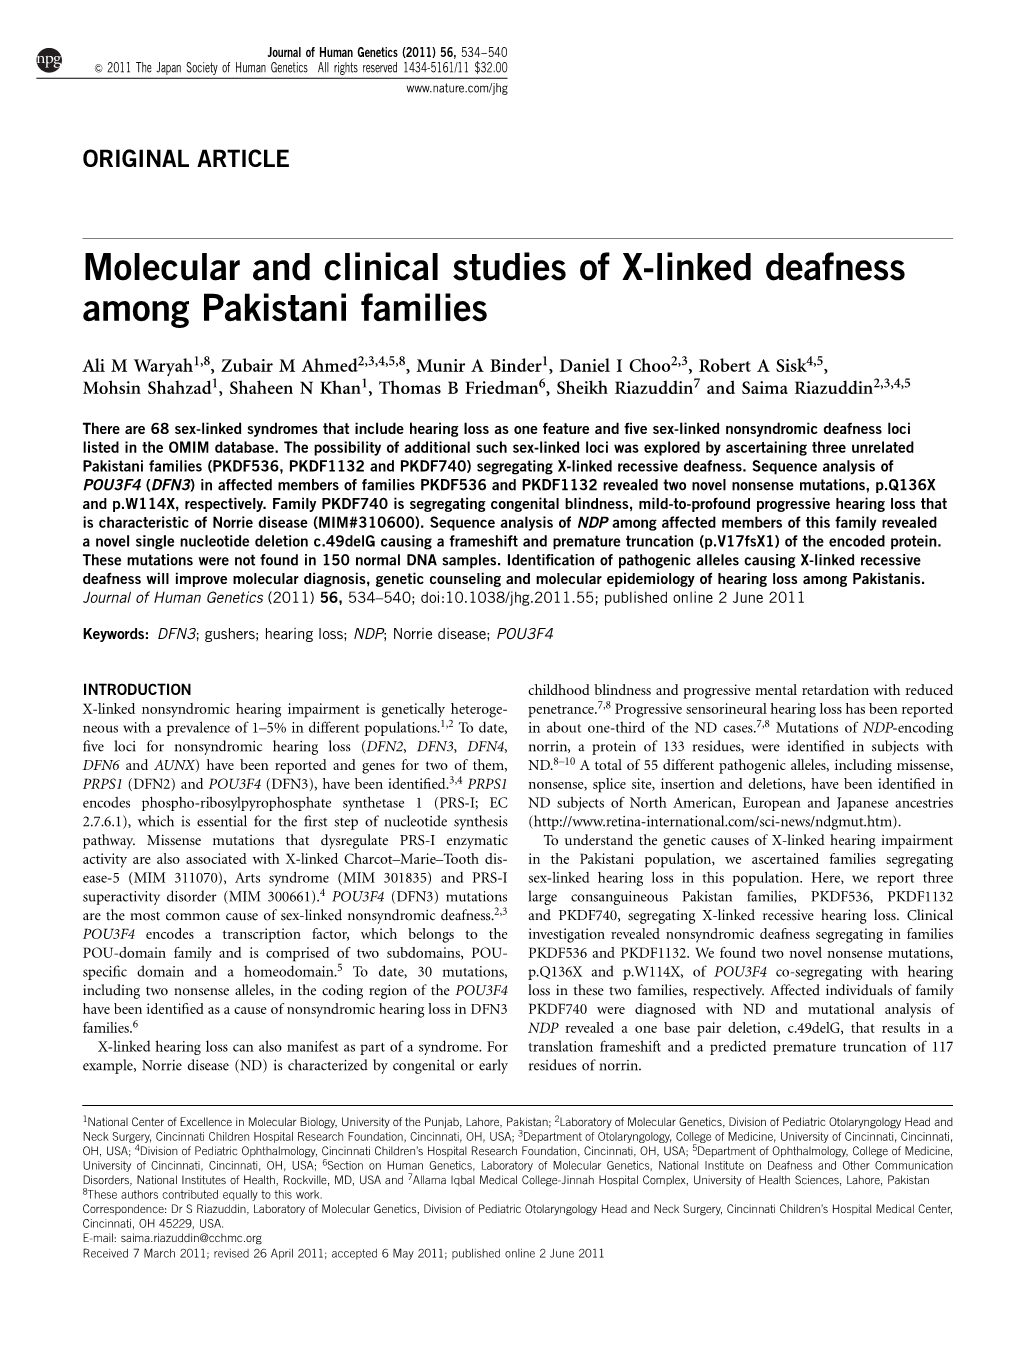 Molecular and Clinical Studies of X-Linked Deafness Among Pakistani Families